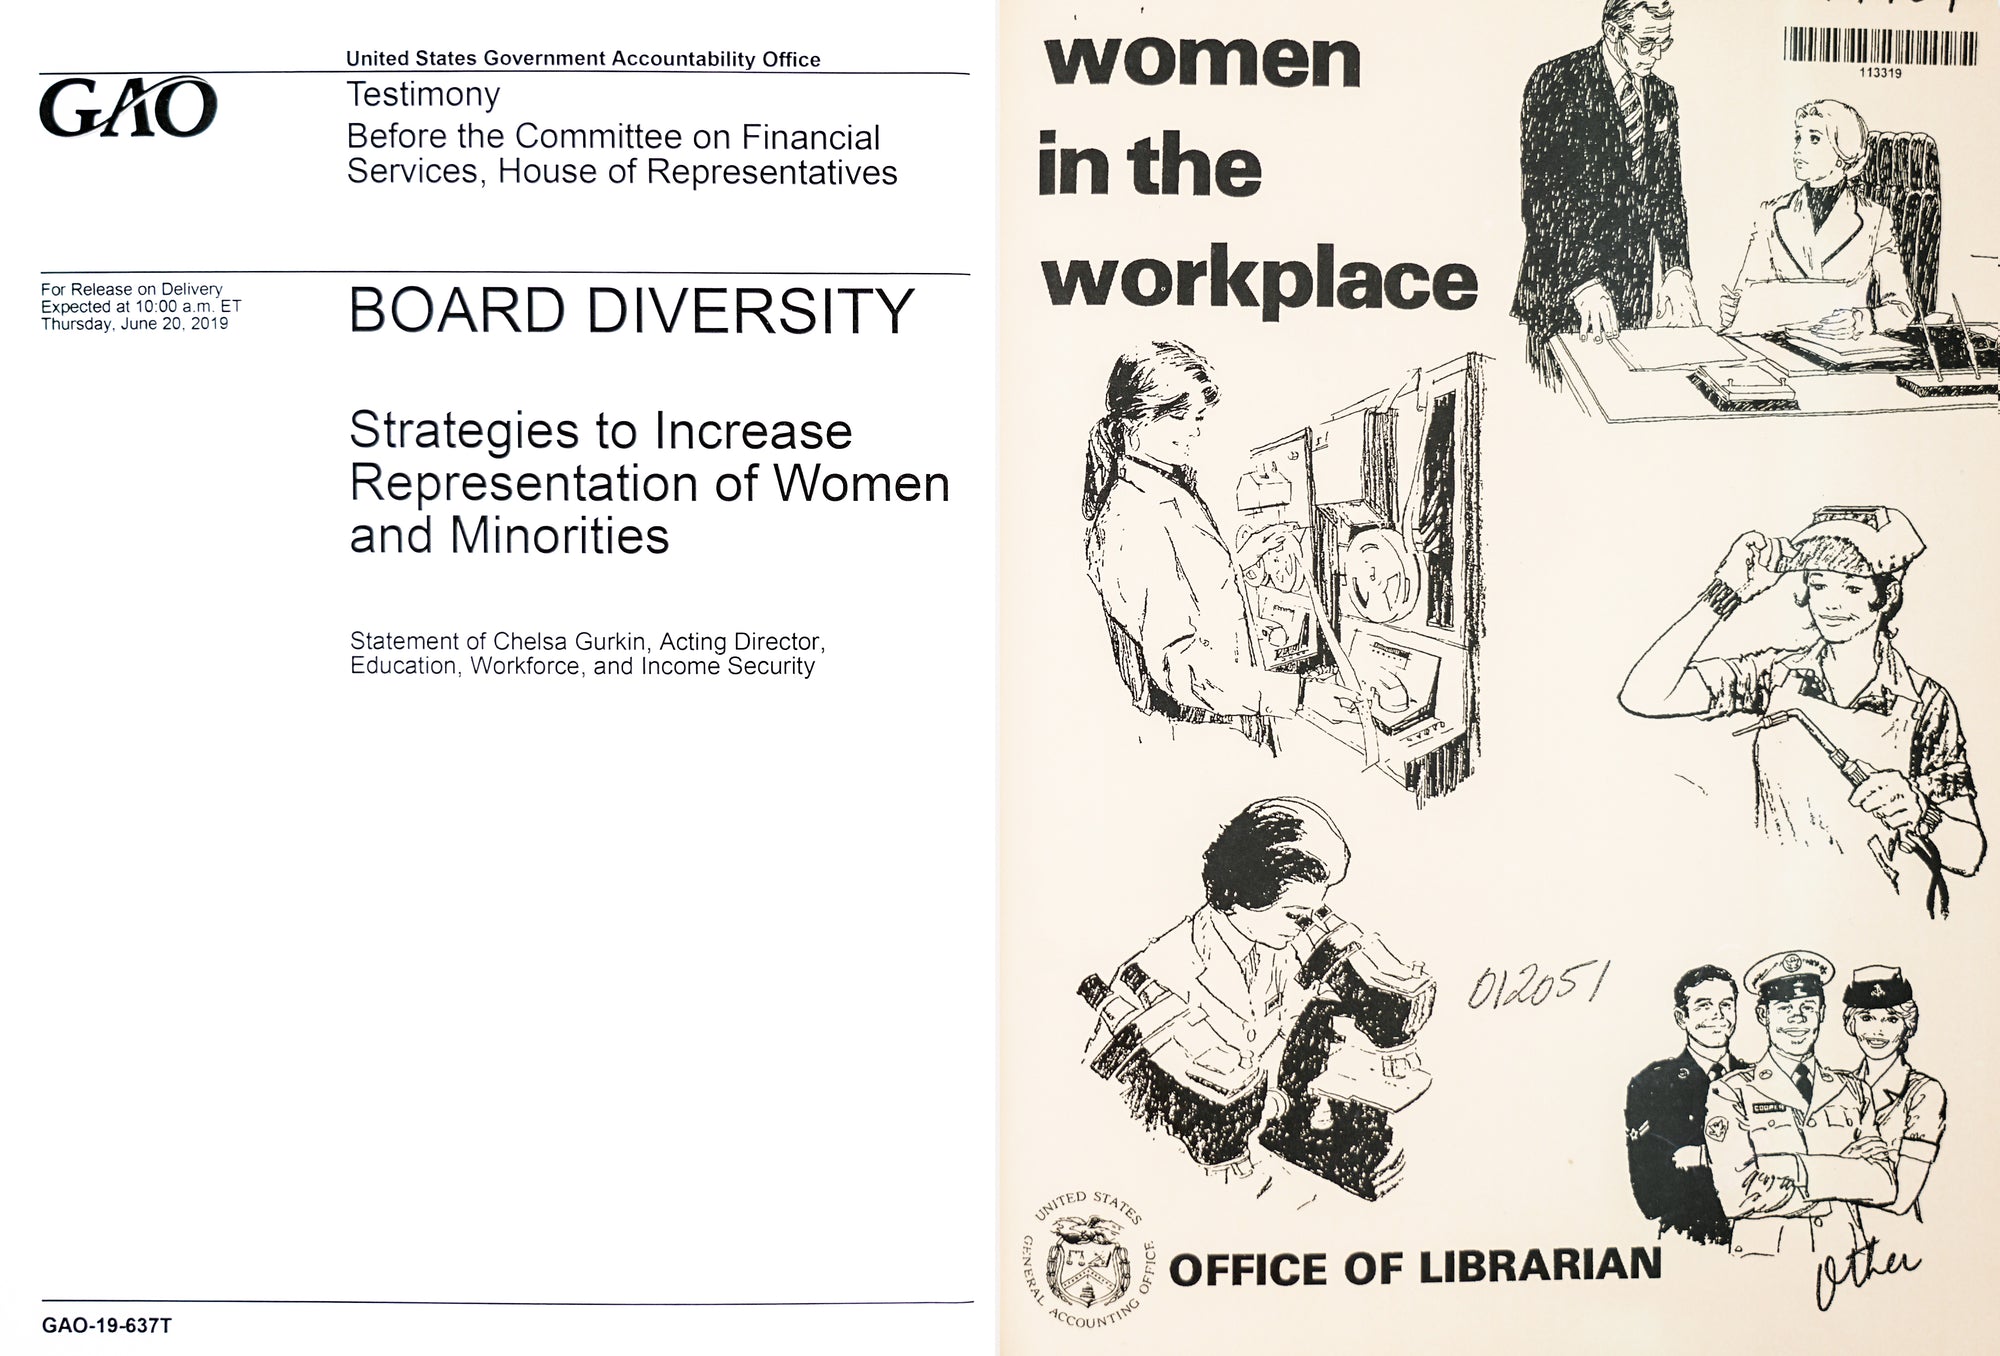 A spread depicting, on the left side, a government report-like cover, reading 'BOARD DIVERSITY: Strategies to Increase Representation of Women and Minorities’, on the right several illustrations of women at work with the imposed title that reads ‘women in the workplace’.